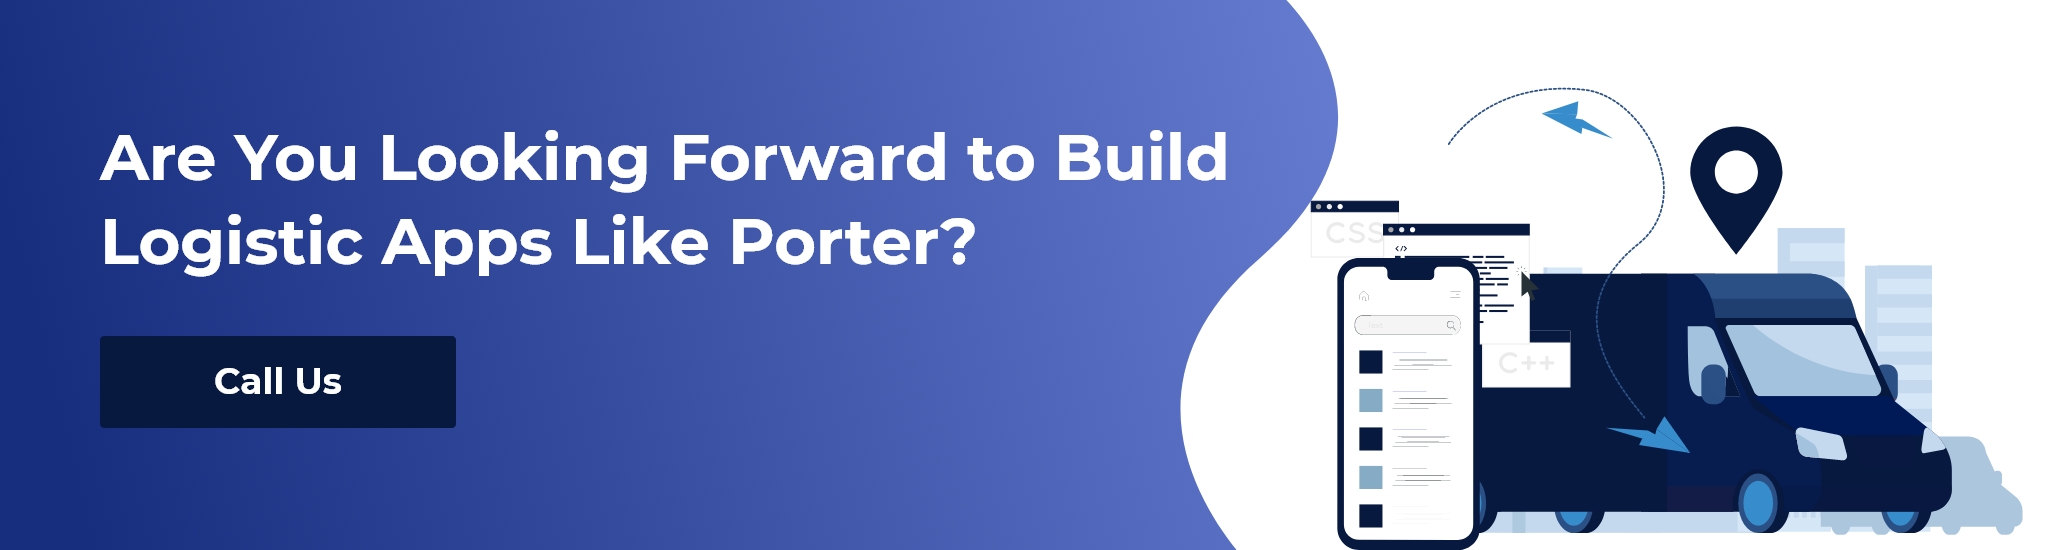 develop logistic apps like porter with experts